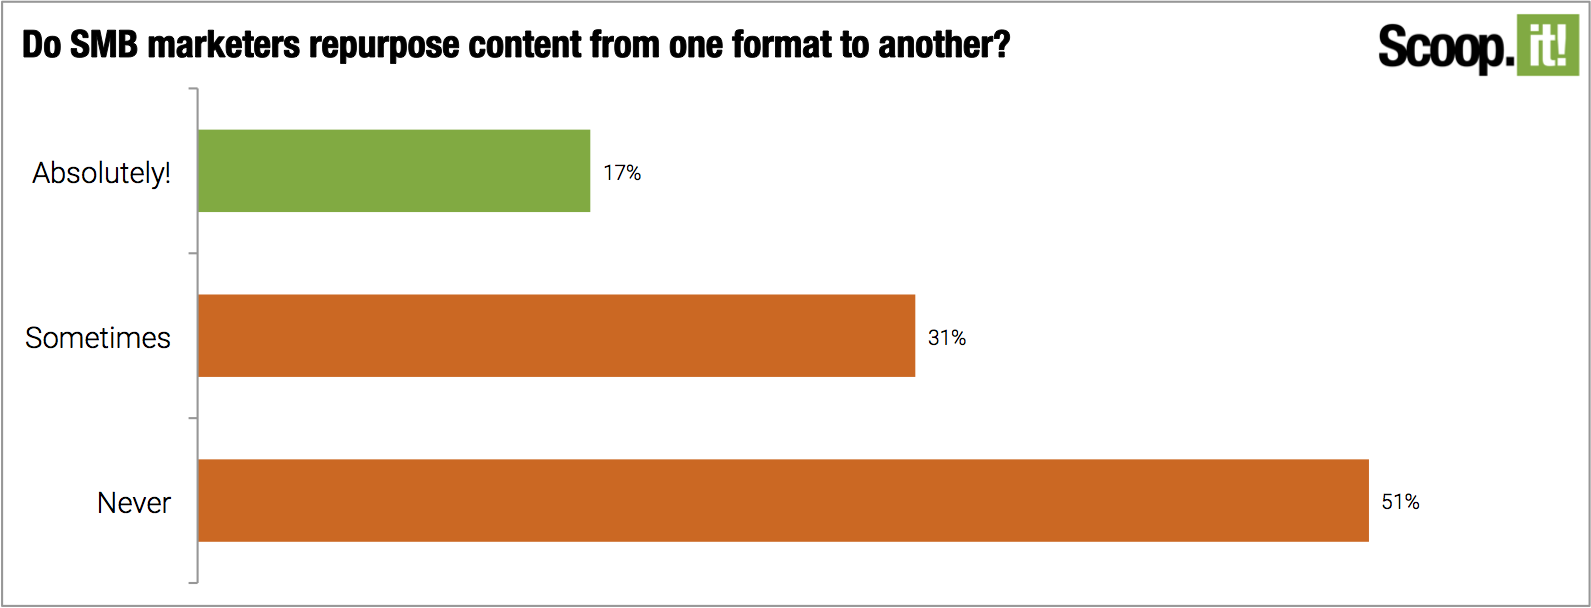 Do SMB marketers repurpose content from one format to another?